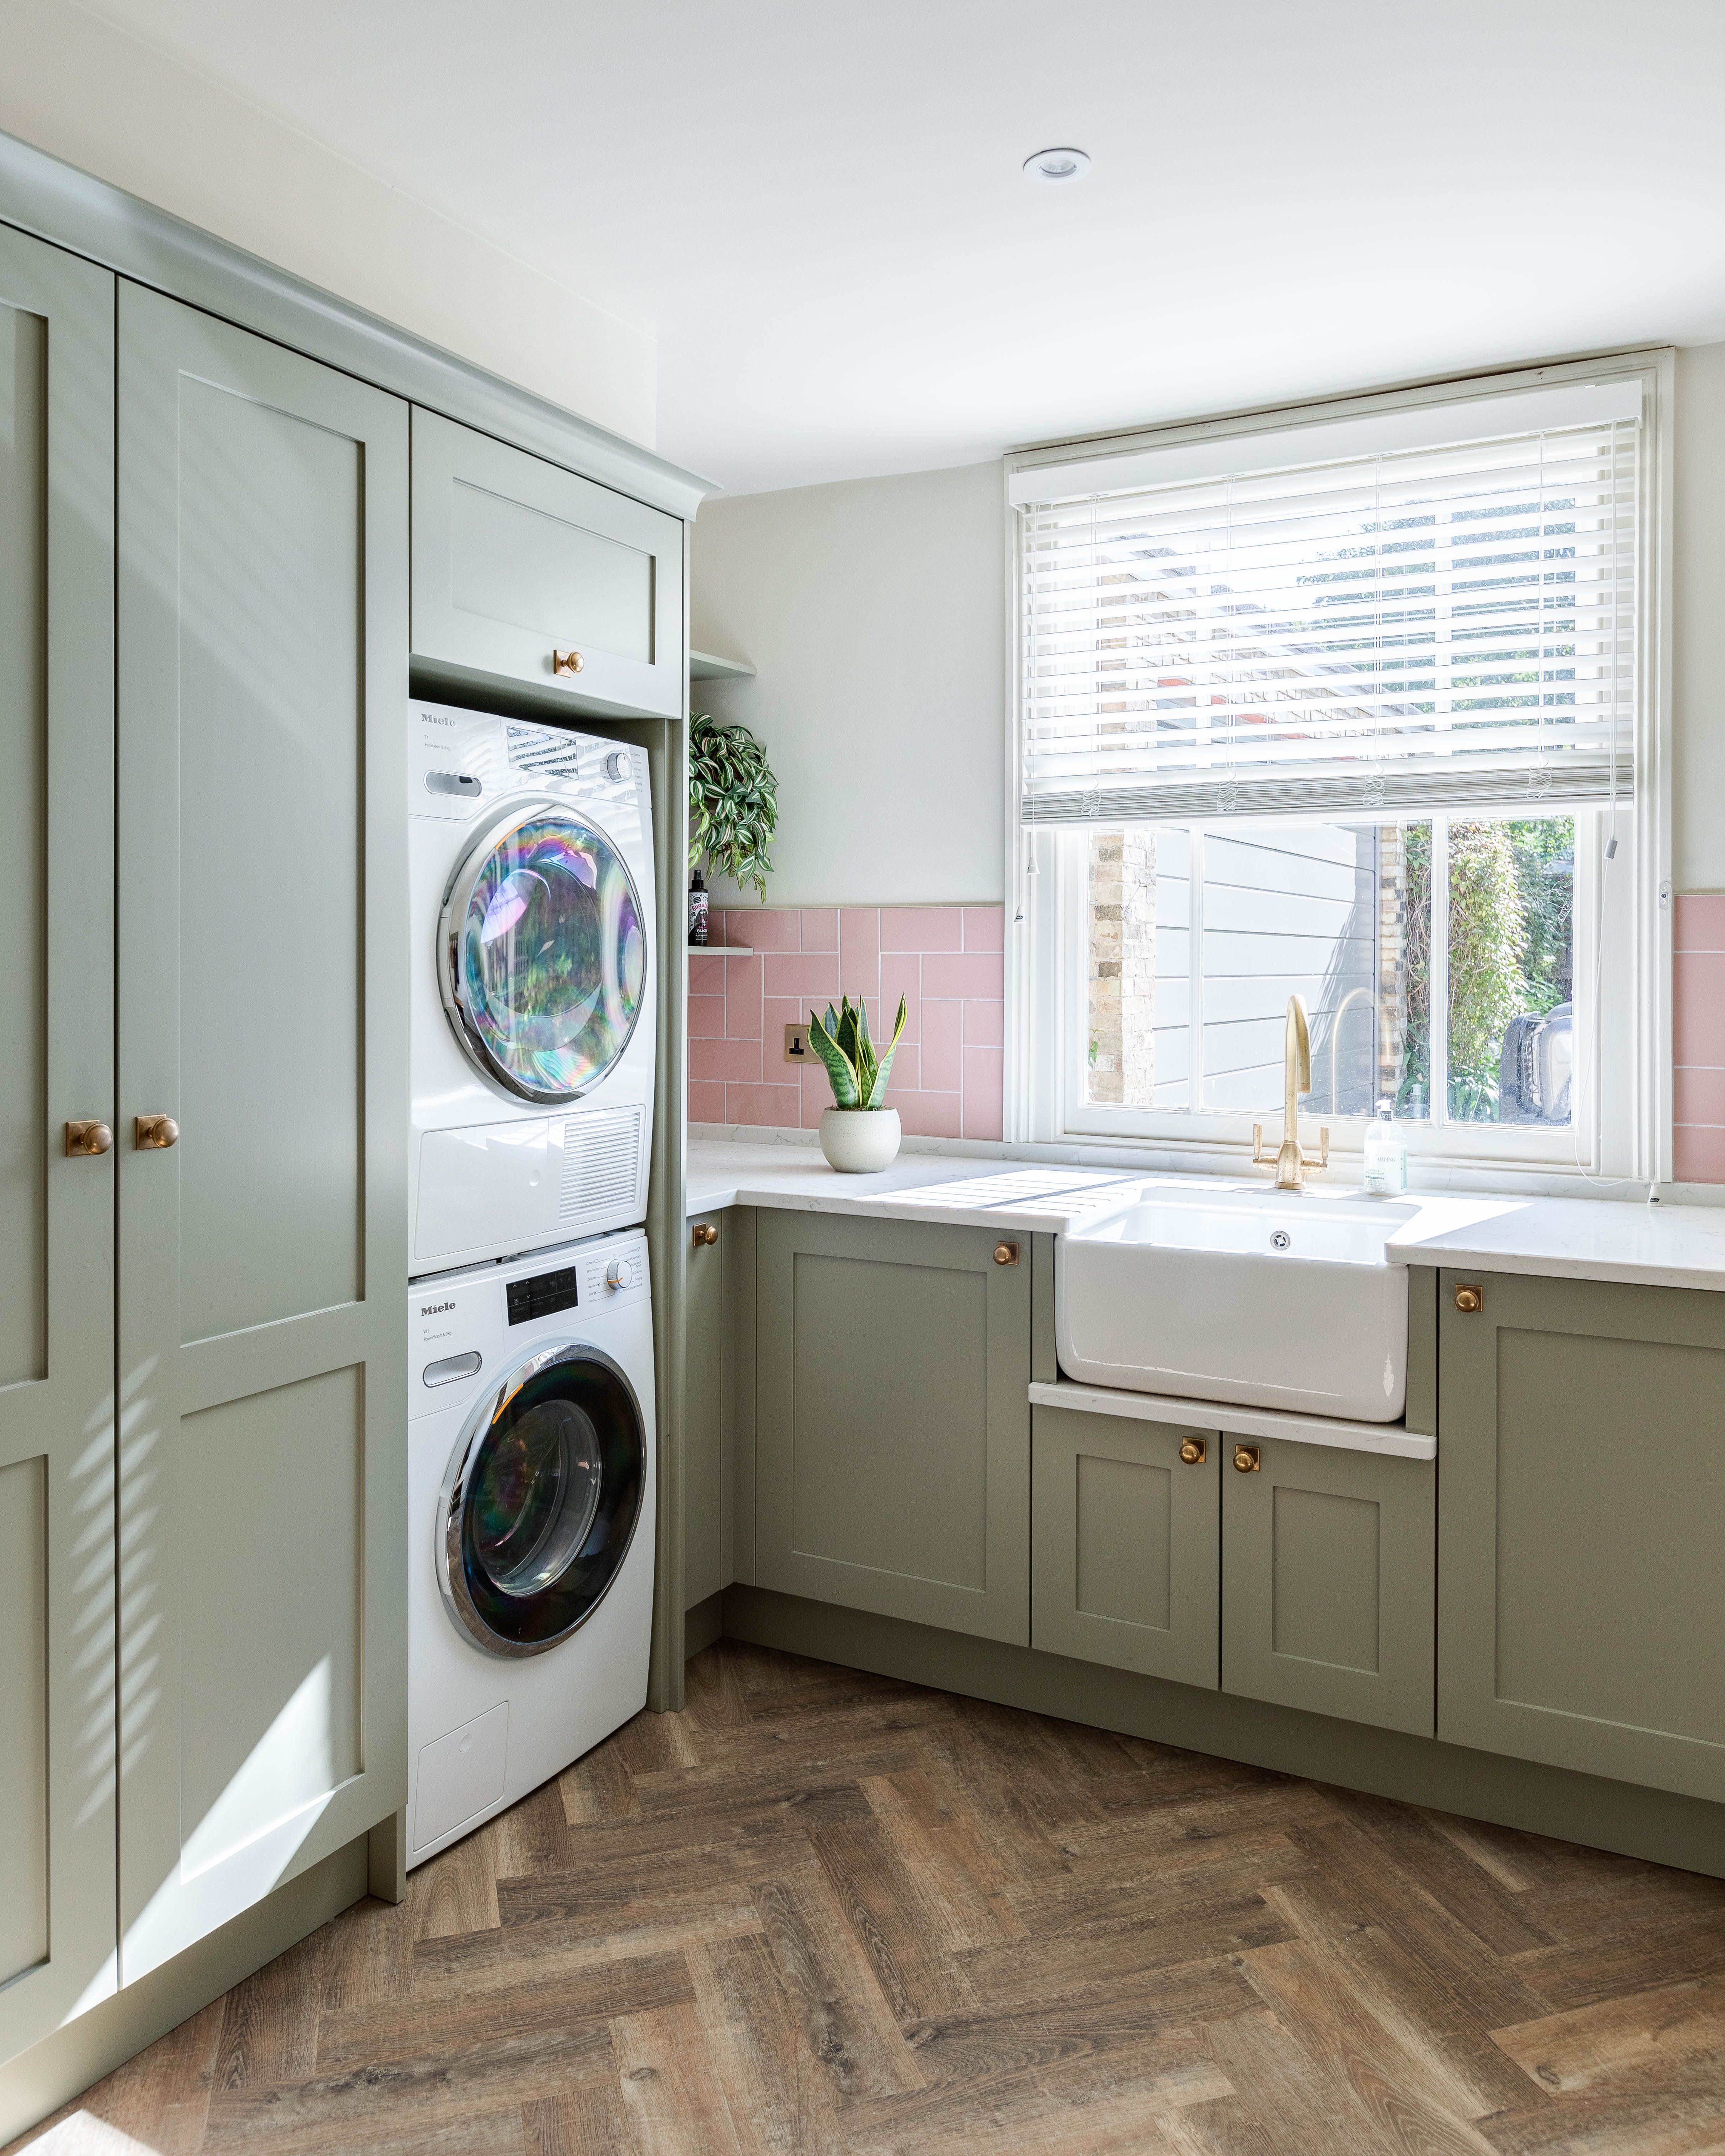 Utility Room: 17 Practical And Stylish Utility Room Design Ideas